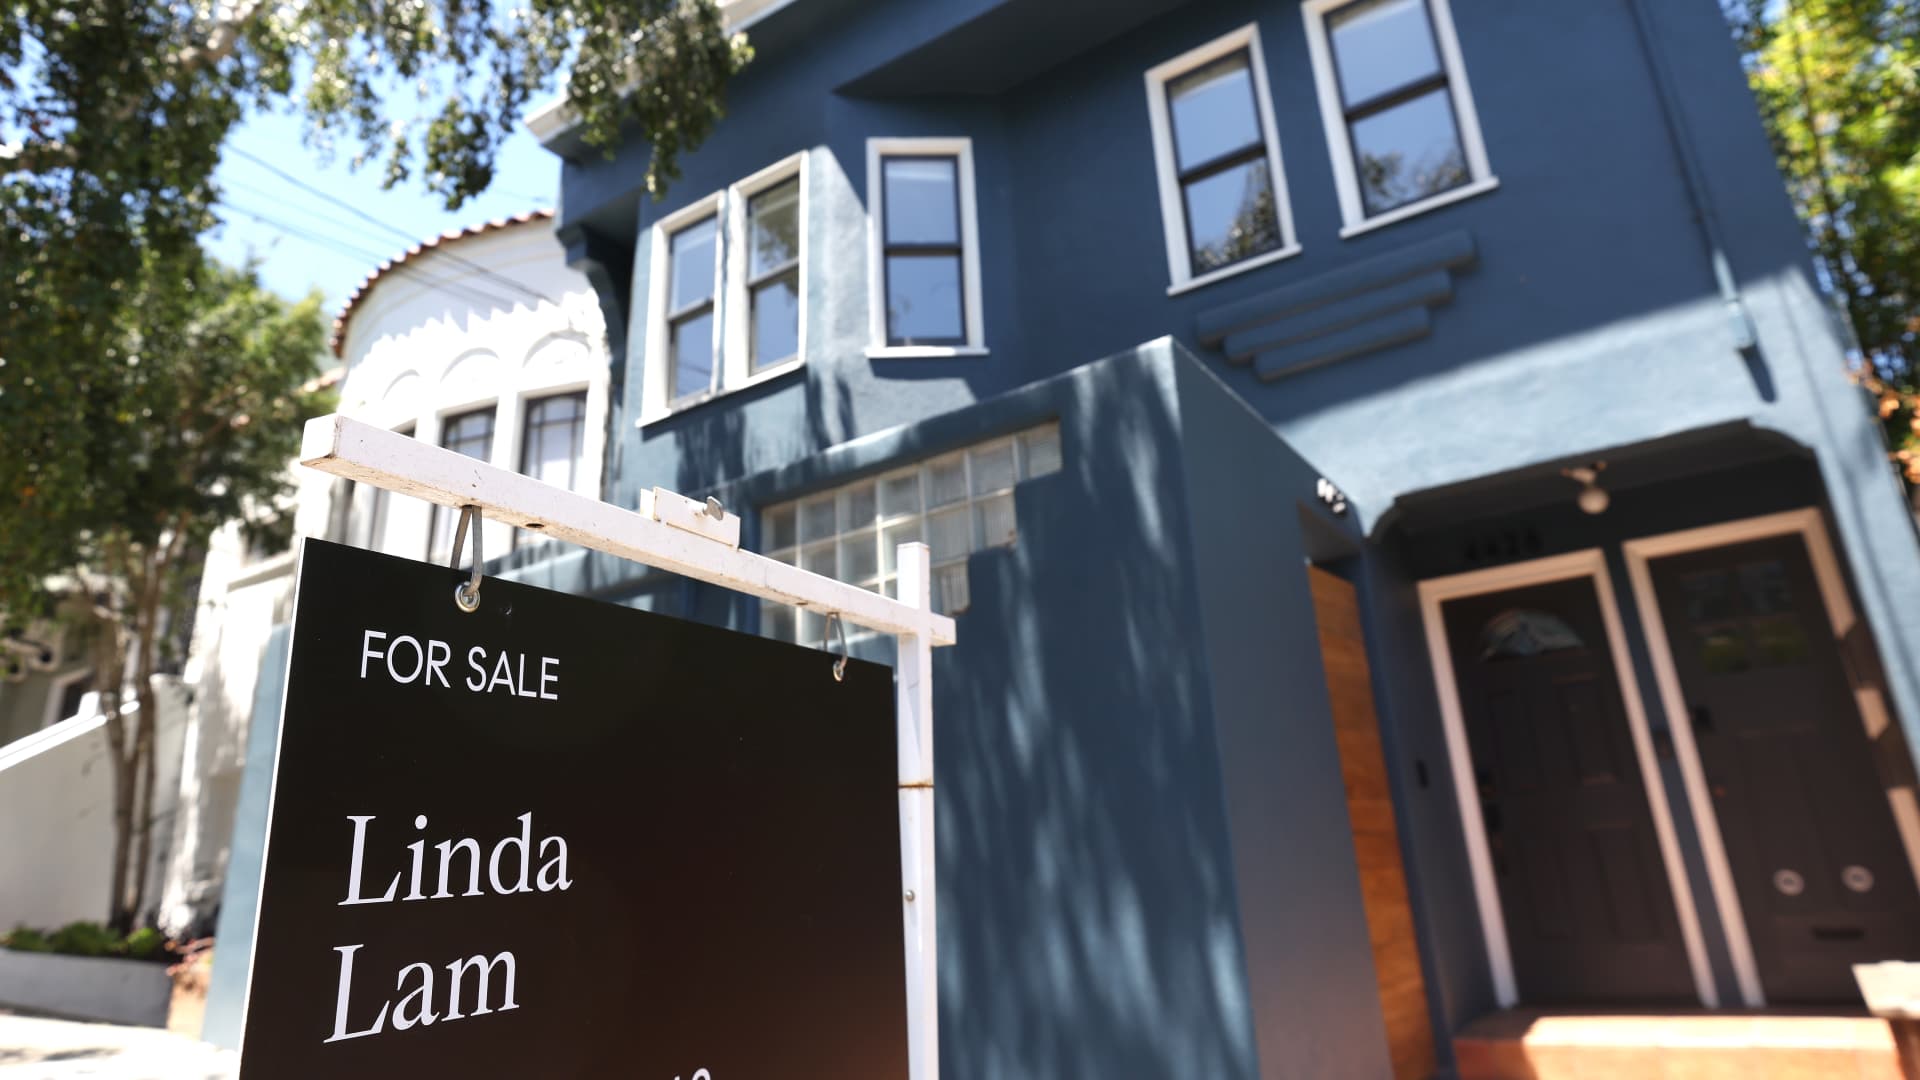 Home prices cool at record pace in June, according to housing data firm